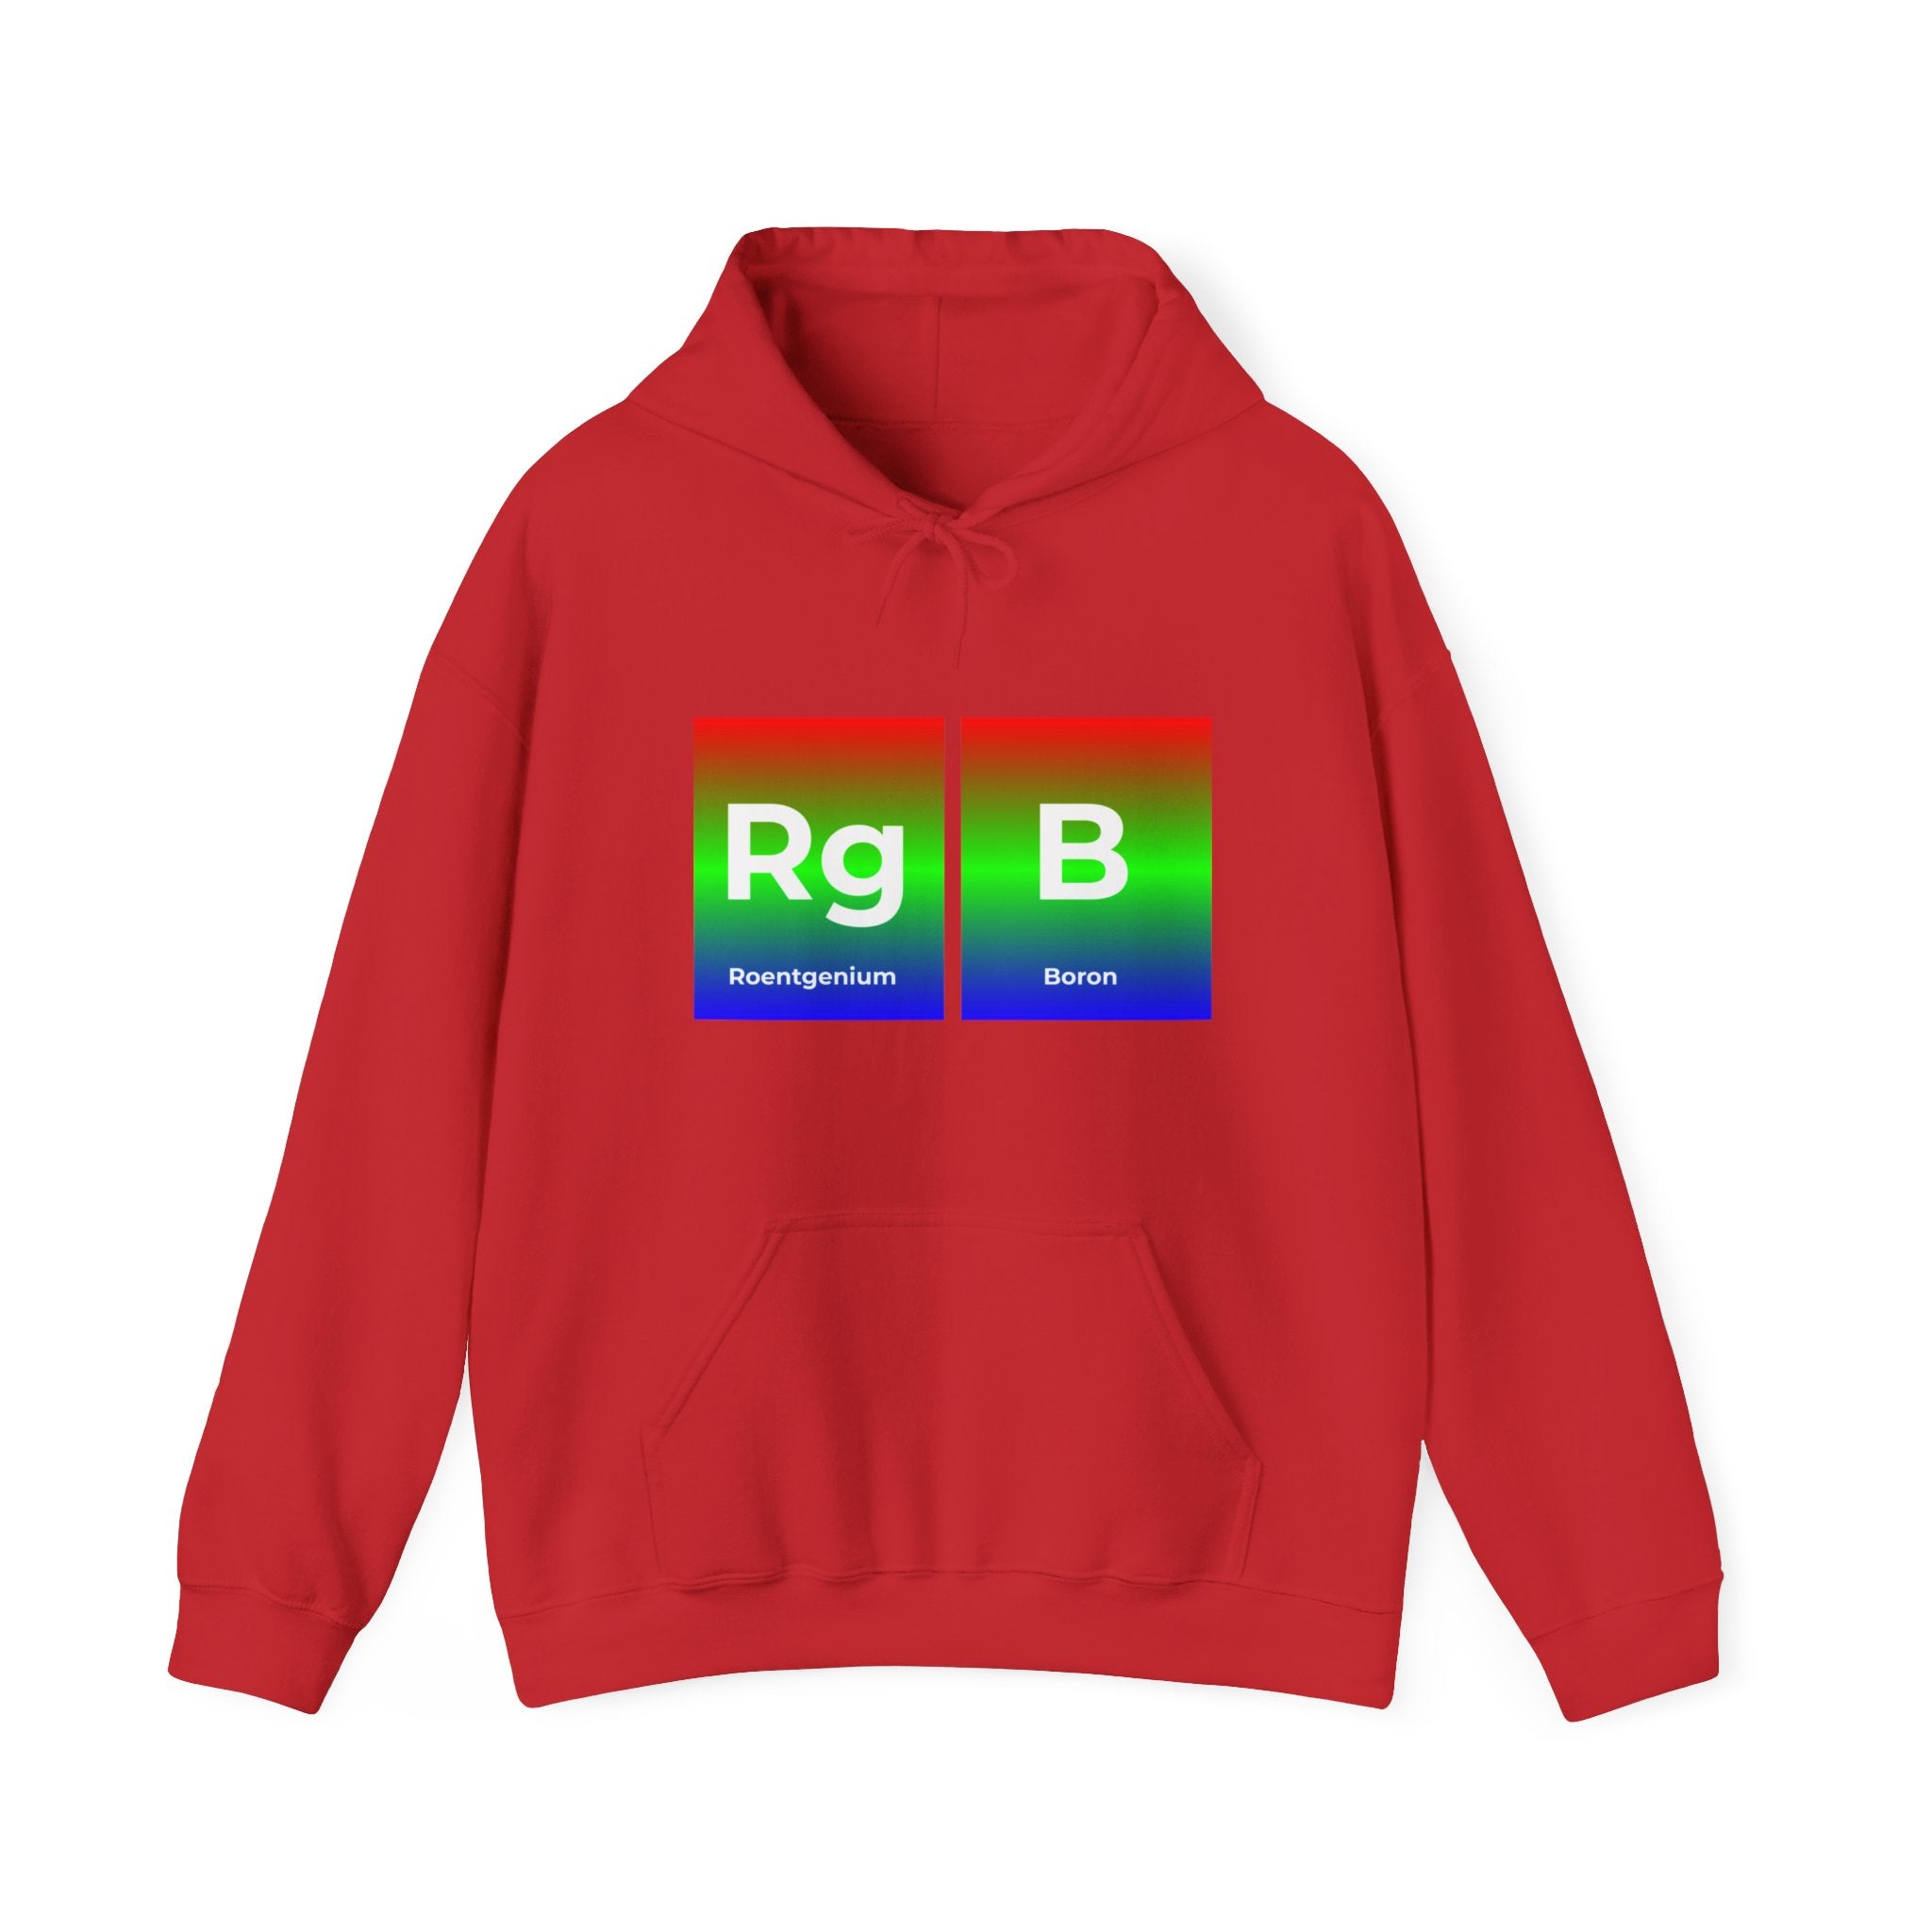 Red hooded sweatshirt featuring a graphic with elements Roentgenium (Rg) and Boron (B) from the periodic table, presented with a gradient background. Experience the unique style and comfort of RG-B - Hooded Sweatshirt designs.